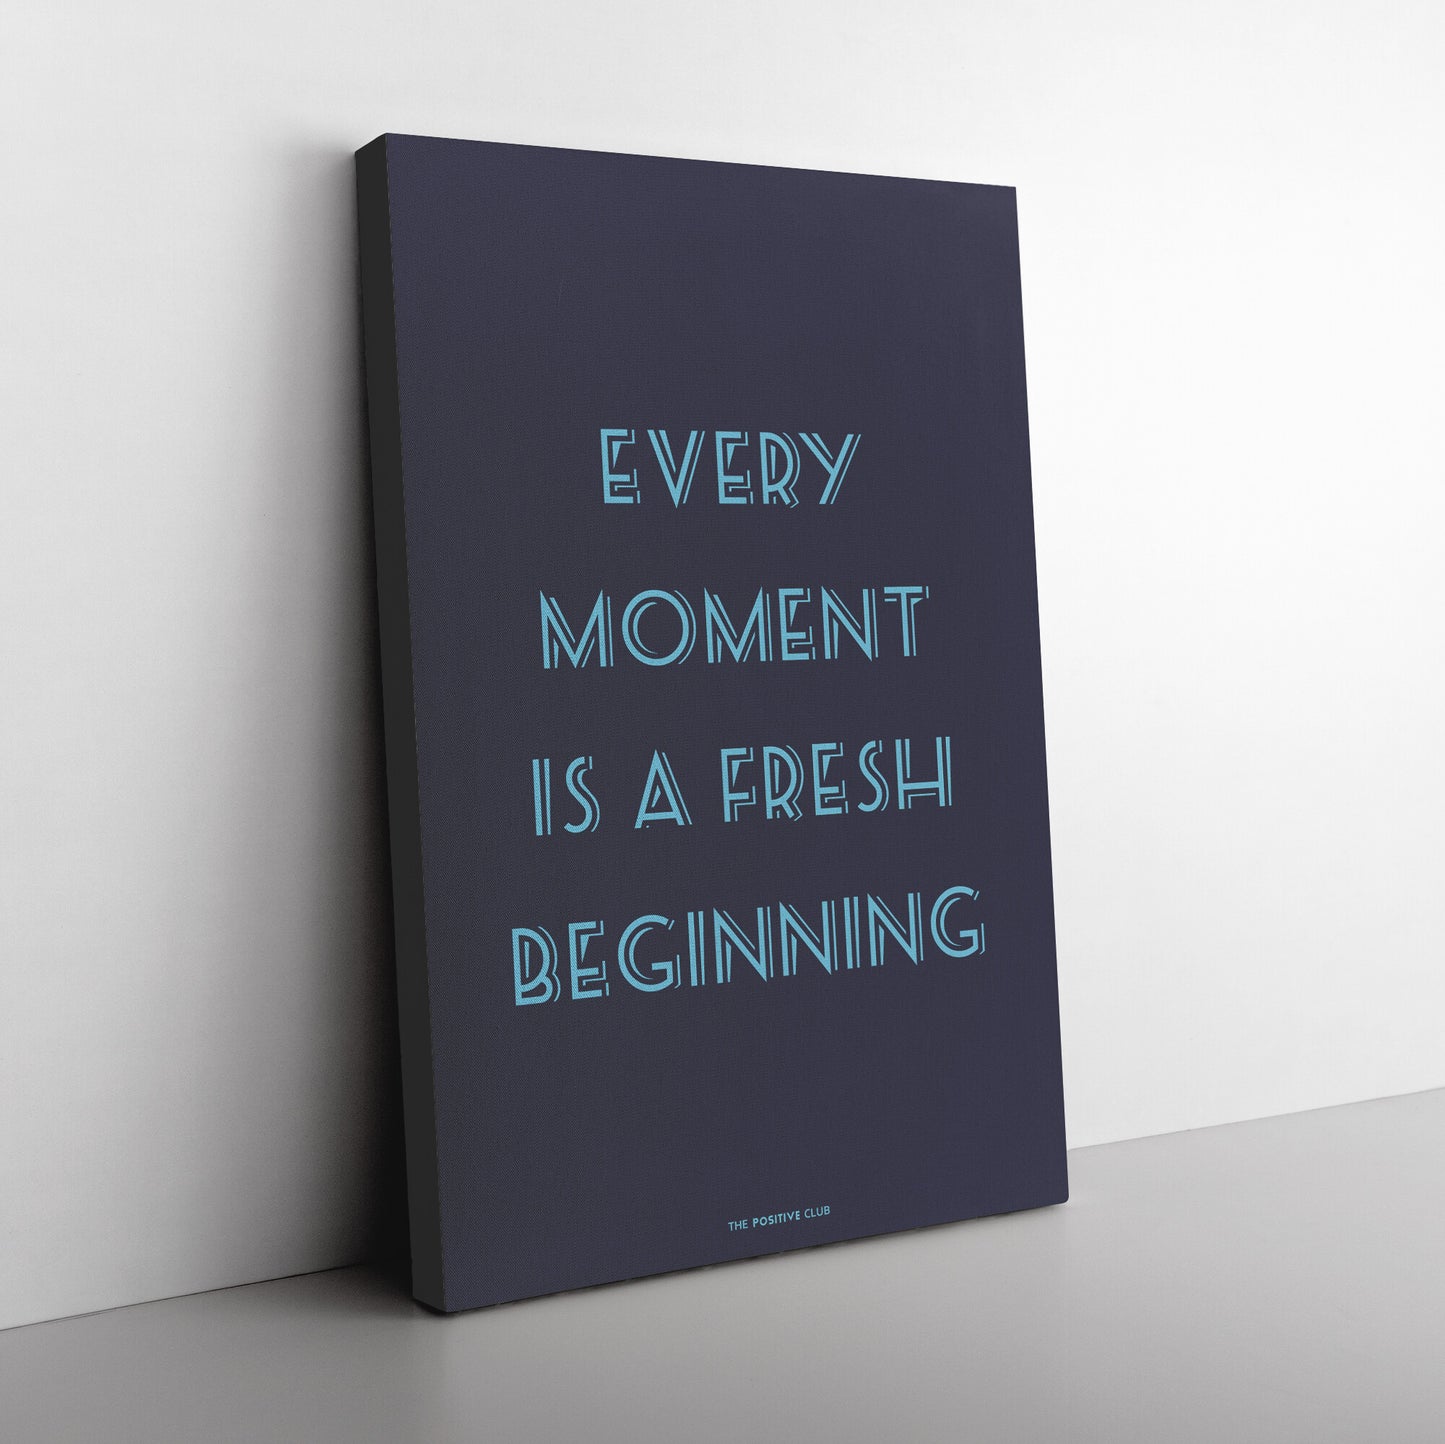 EVERY MOMENT IS A FRESH BEGINNING